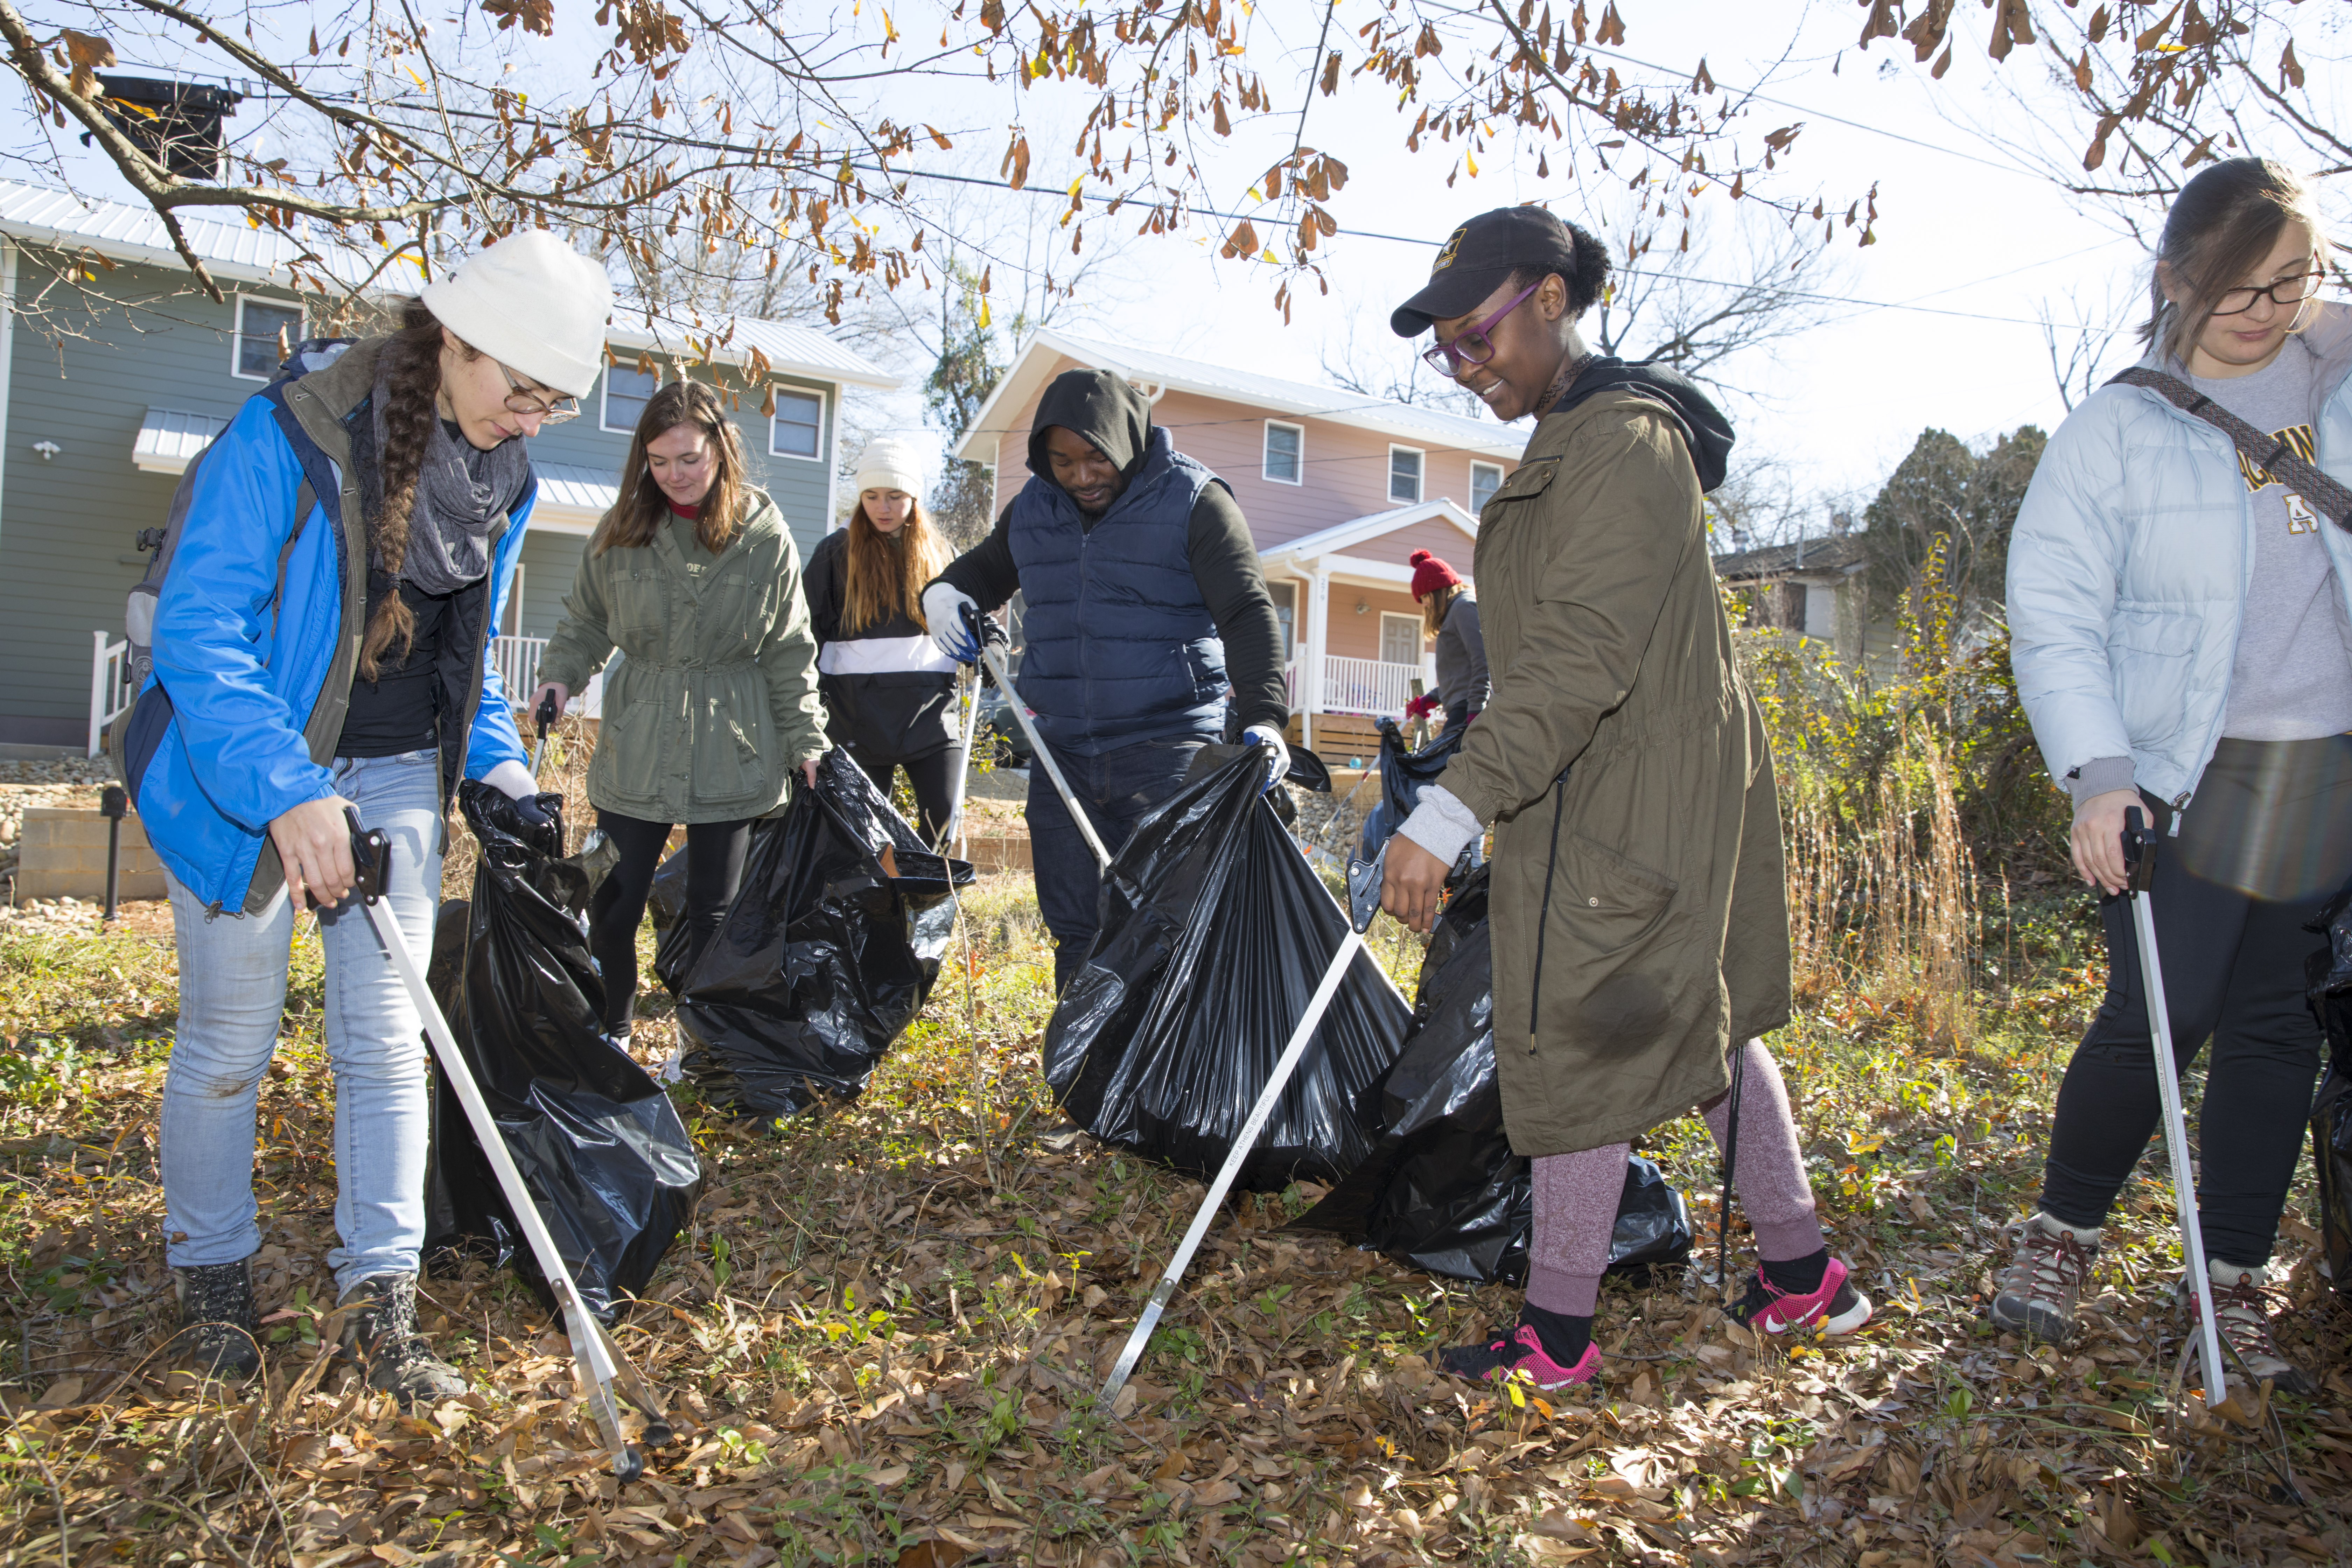 Students and community unite for service - UGA Today